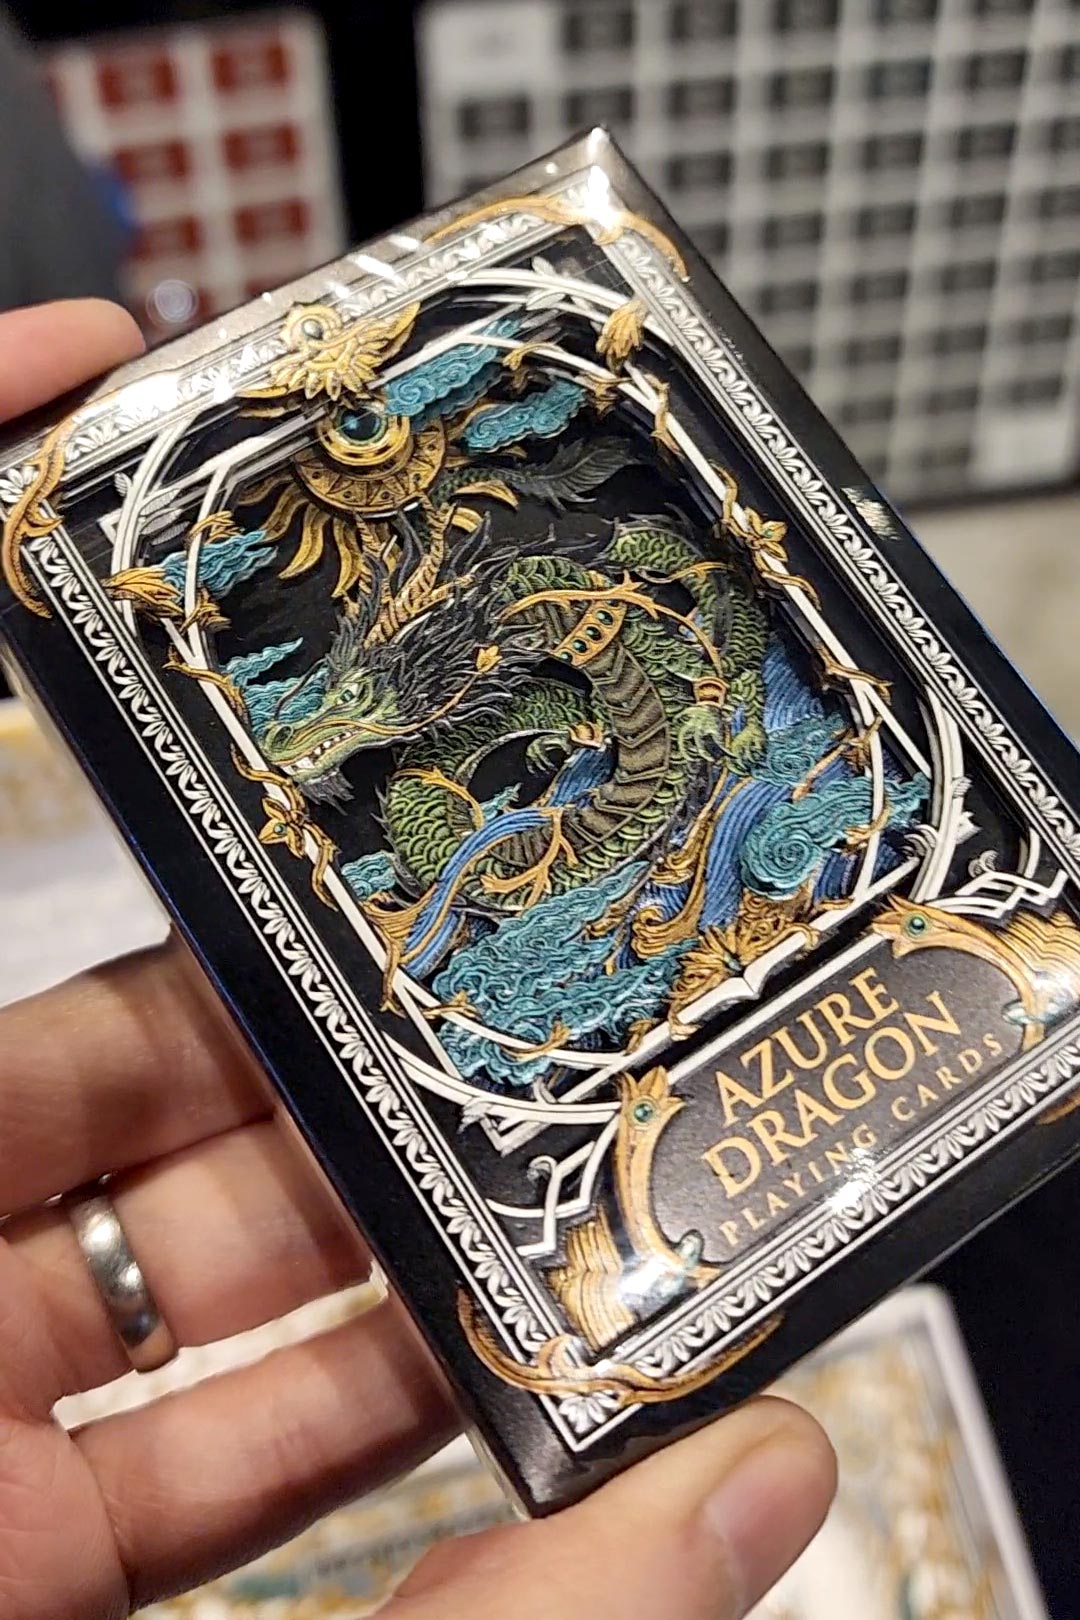 One of the most amazing playing card sets!